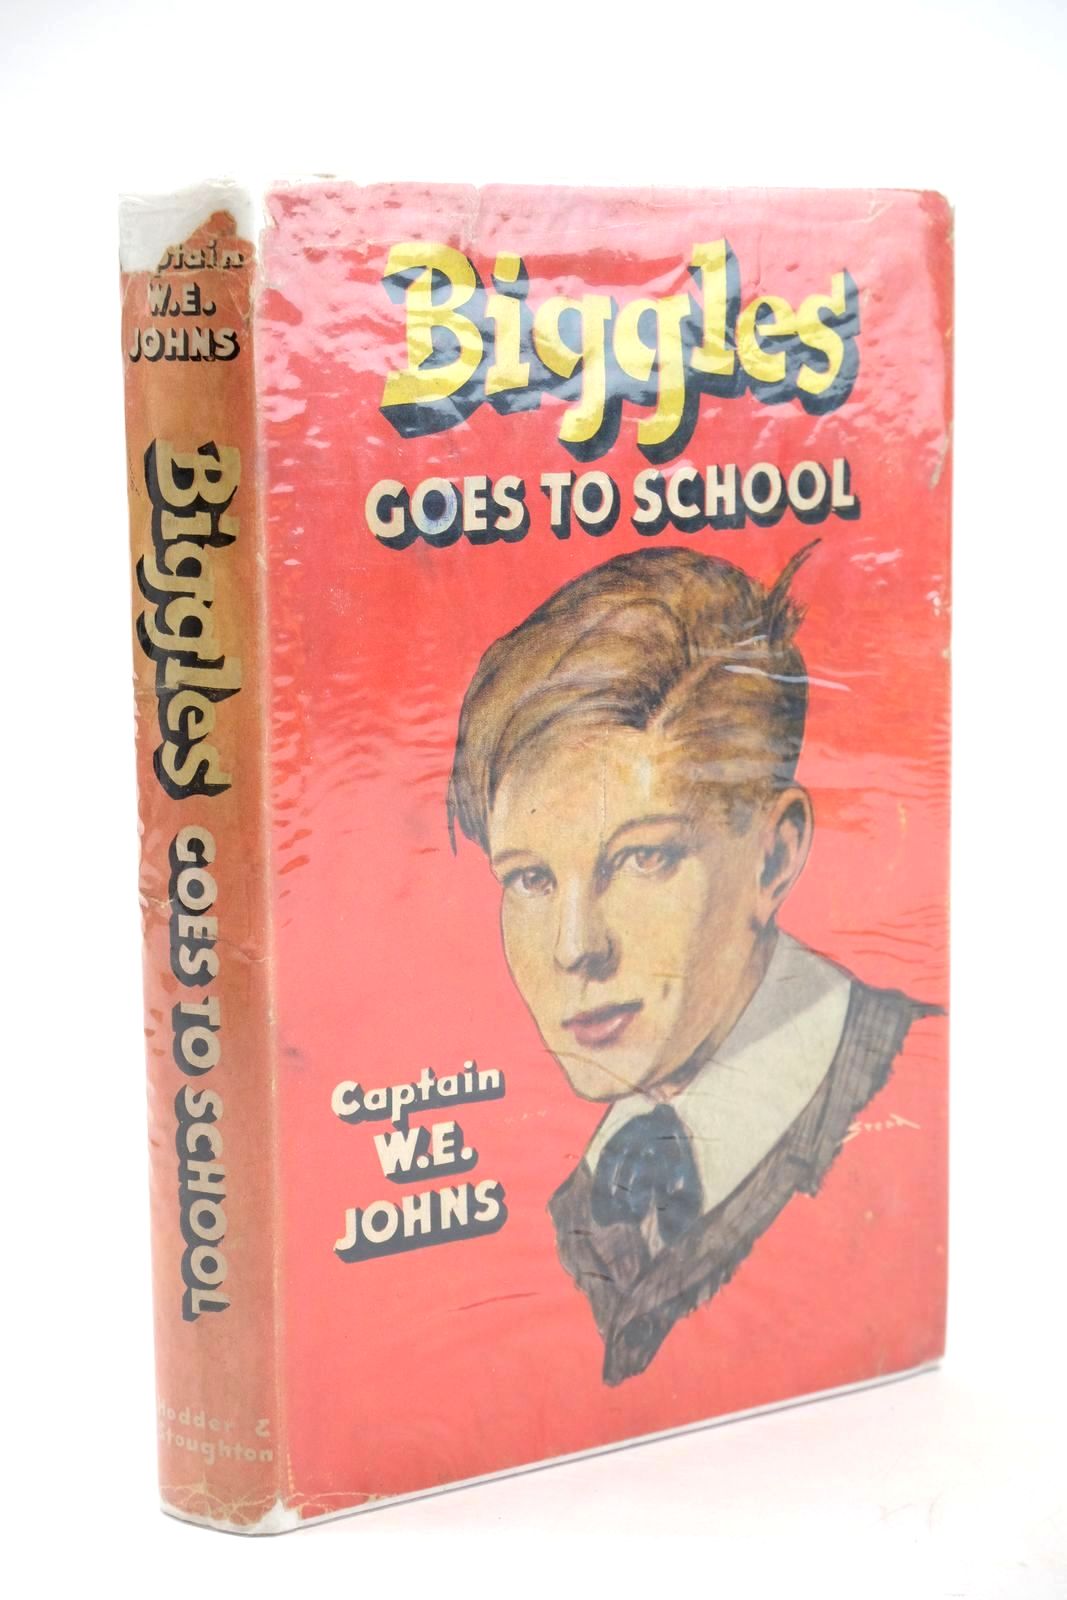 Photo of BIGGLES GOES TO SCHOOL written by Johns, W.E. illustrated by Stead,  published by Hodder &amp; Stoughton (STOCK CODE: 1324035)  for sale by Stella & Rose's Books